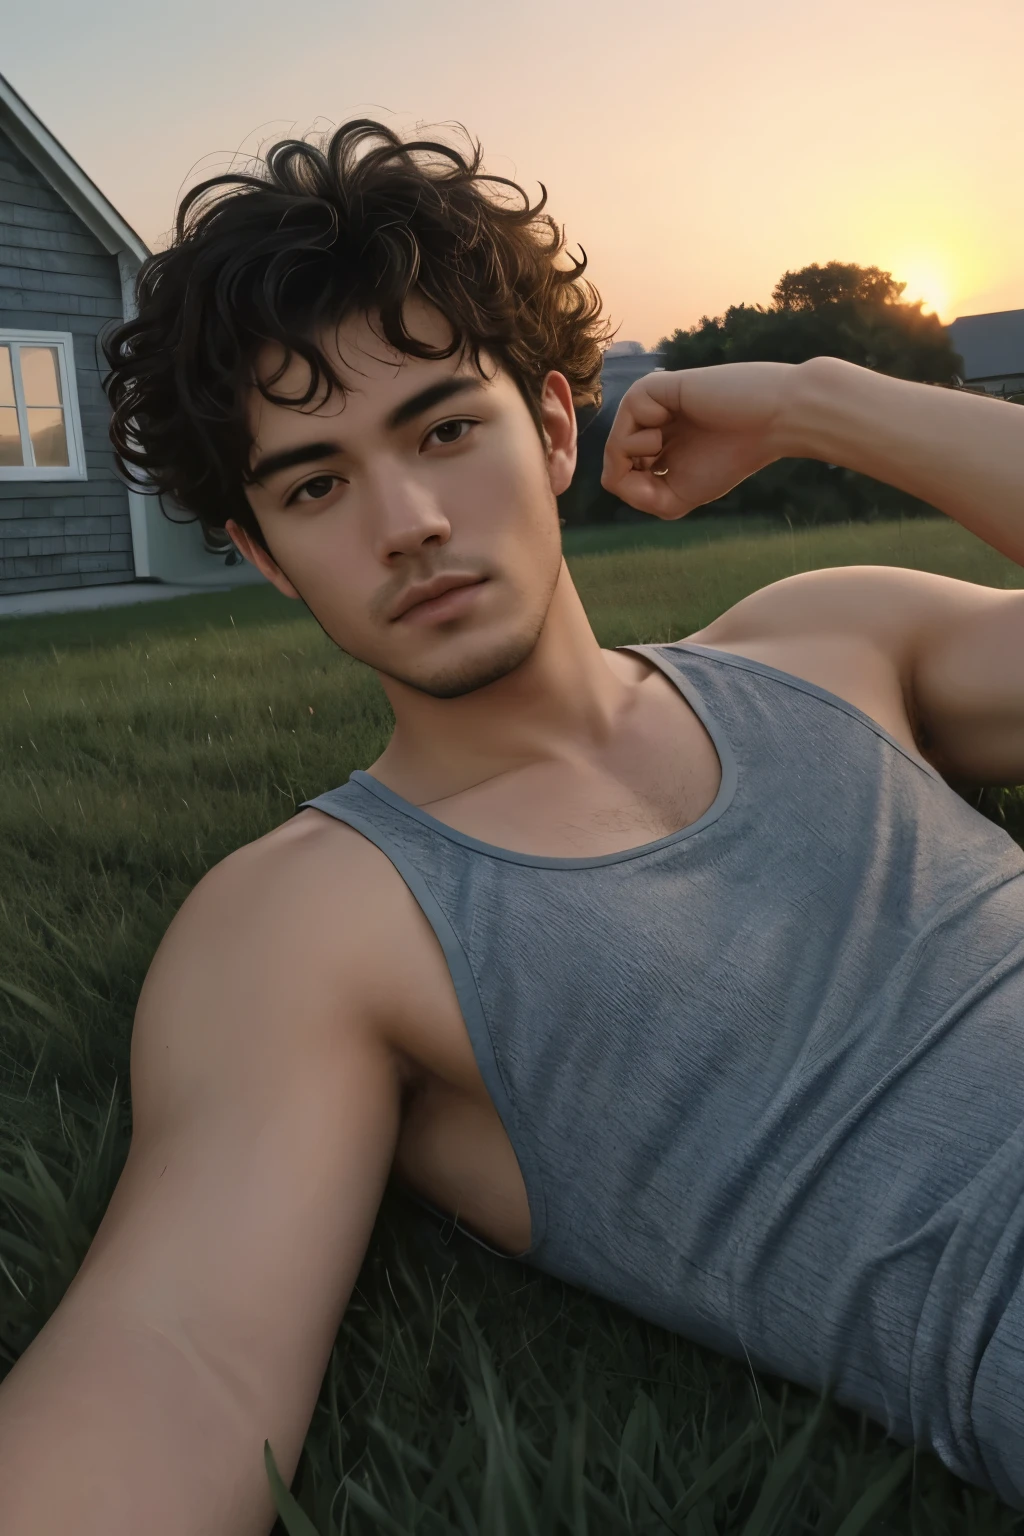 Hyperrealistic art photo of typerson a man, curly hair, wearing a tank top, outside a house, laying down on grass, sunset, looking at viewer,  . Extremely high-resolution details, photographic, realism pushed to extreme, fine texture, incredibly lifelike